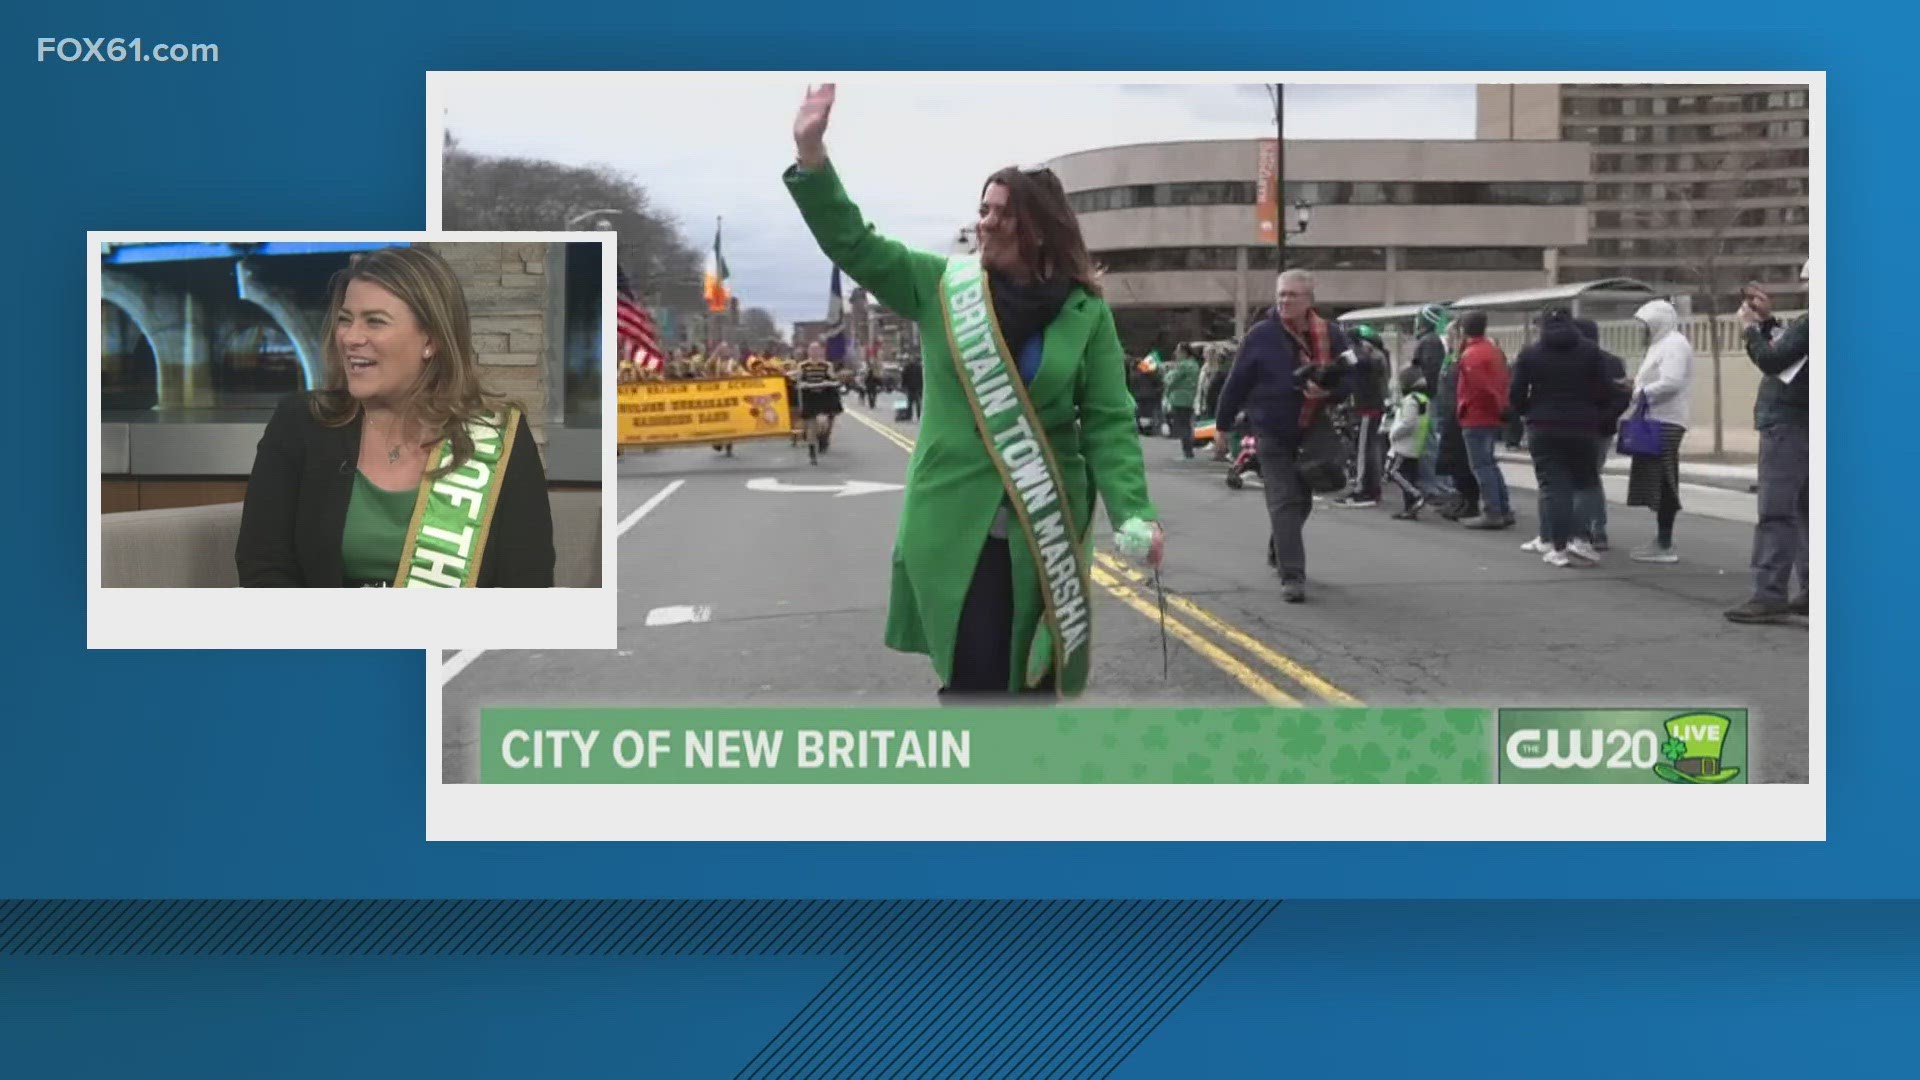 Mayor Stewart has been involved with the St. Patrick's Day Parade for many years and last year walked as the city's marshall.